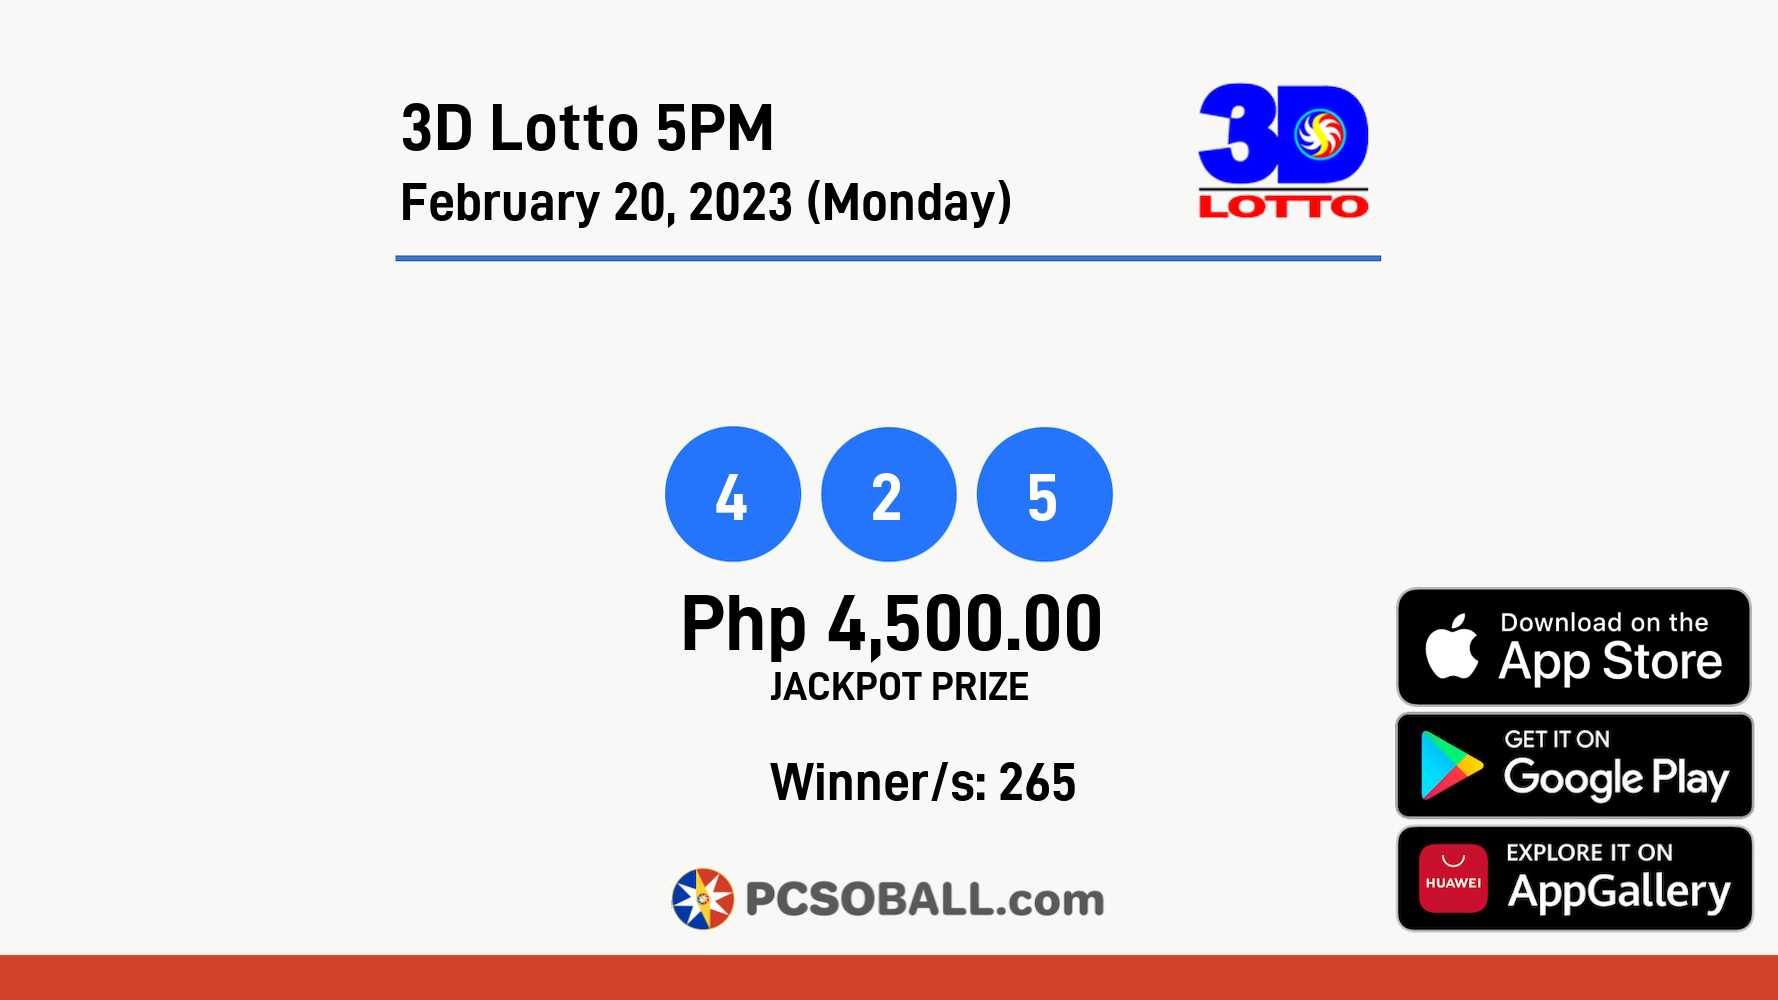 3D Lotto 5PM February 20, 2023 (Monday) Result